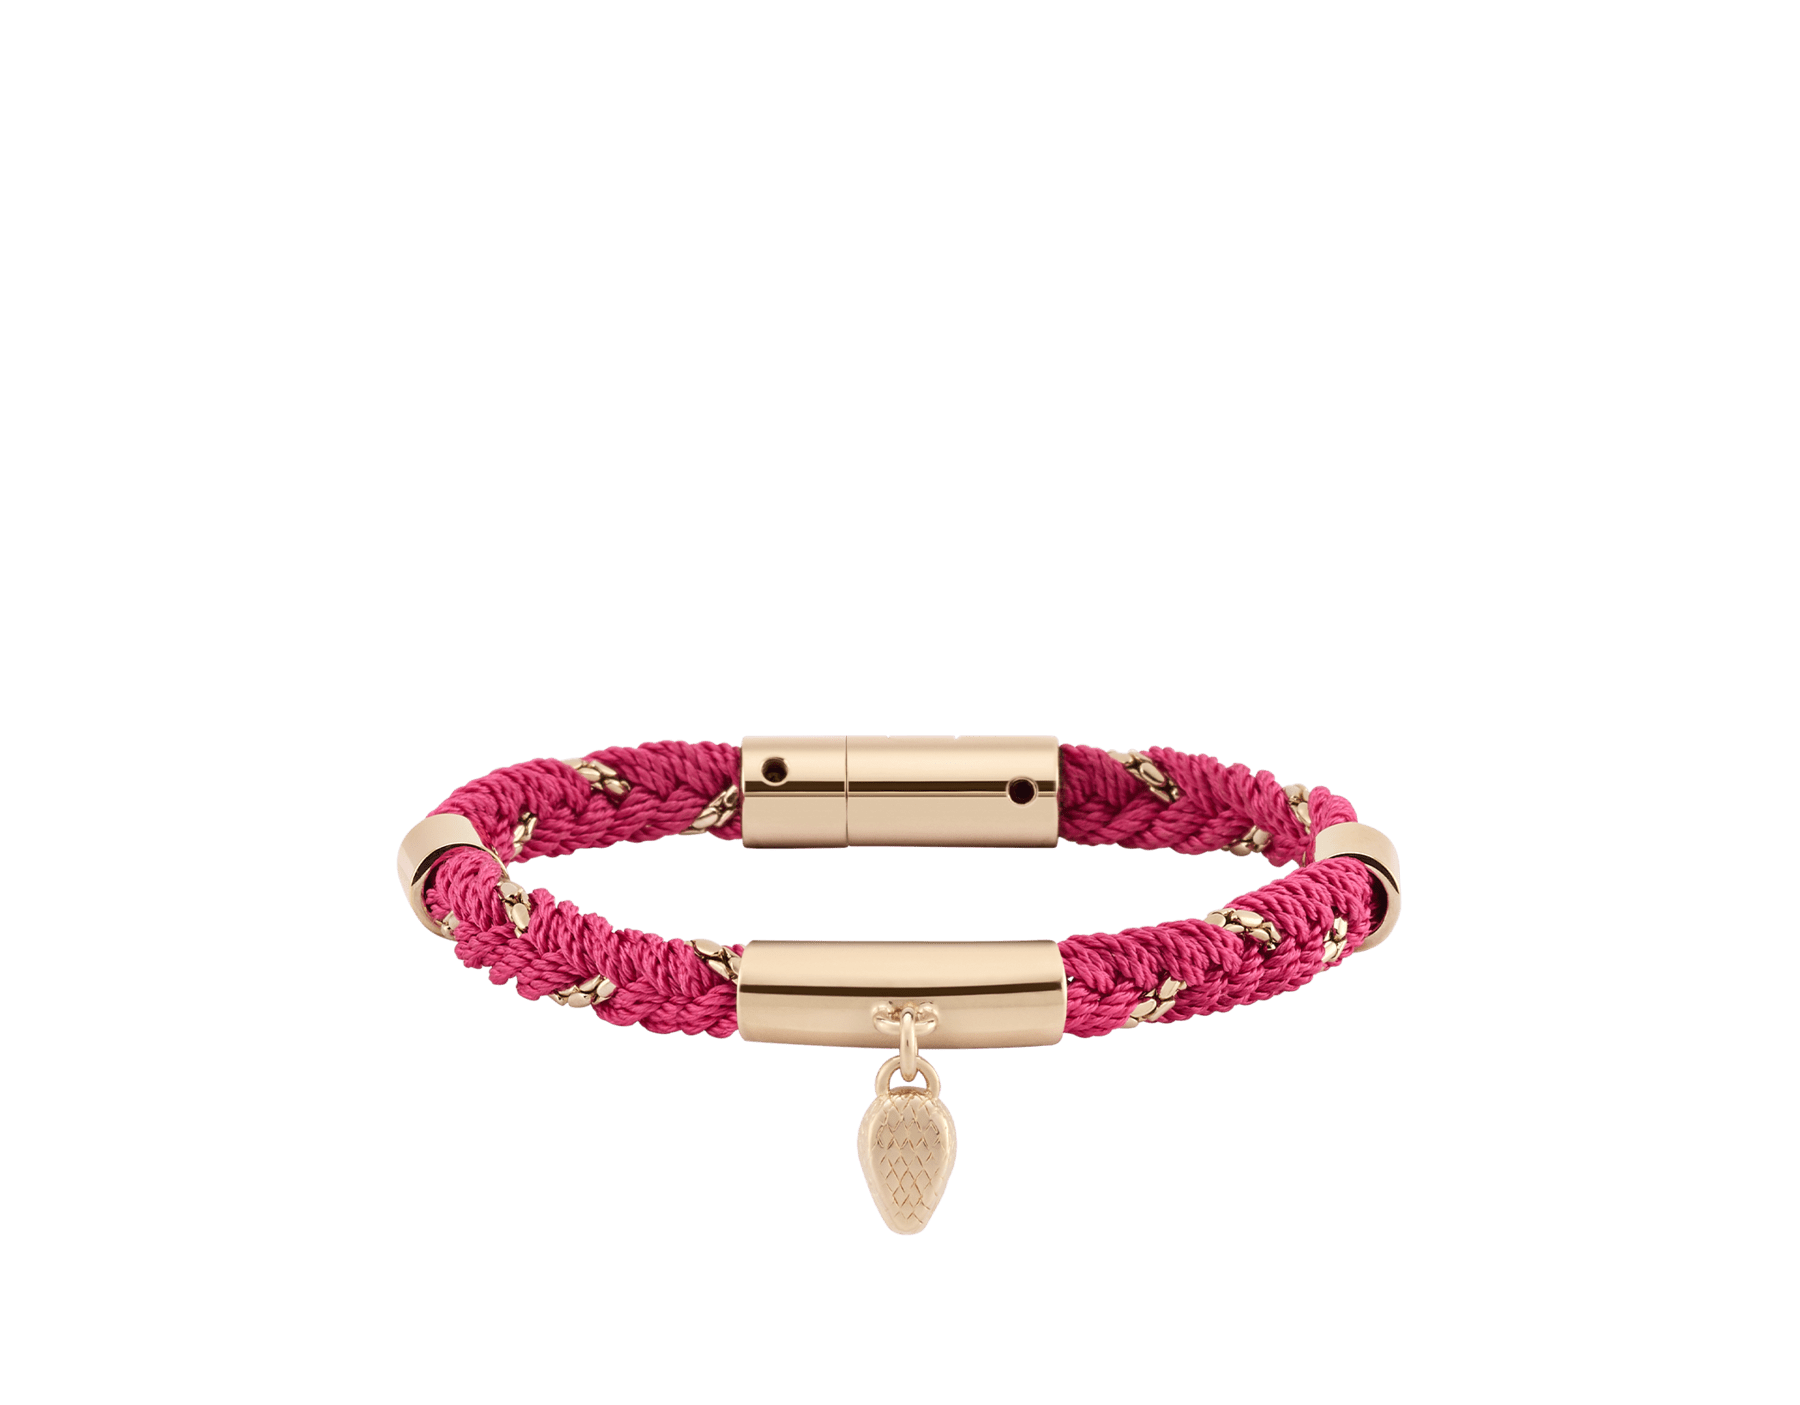 Serpenti Forever multibraided bracelet in truly tourmaline fuchsia coiled torchon and light-gold plated brass chain. Captivating snakehead charm in light gold-plated brass embellished with red enamel eyes, and press-stud closure. SERPMULTIBRAID-WC-TT image 1